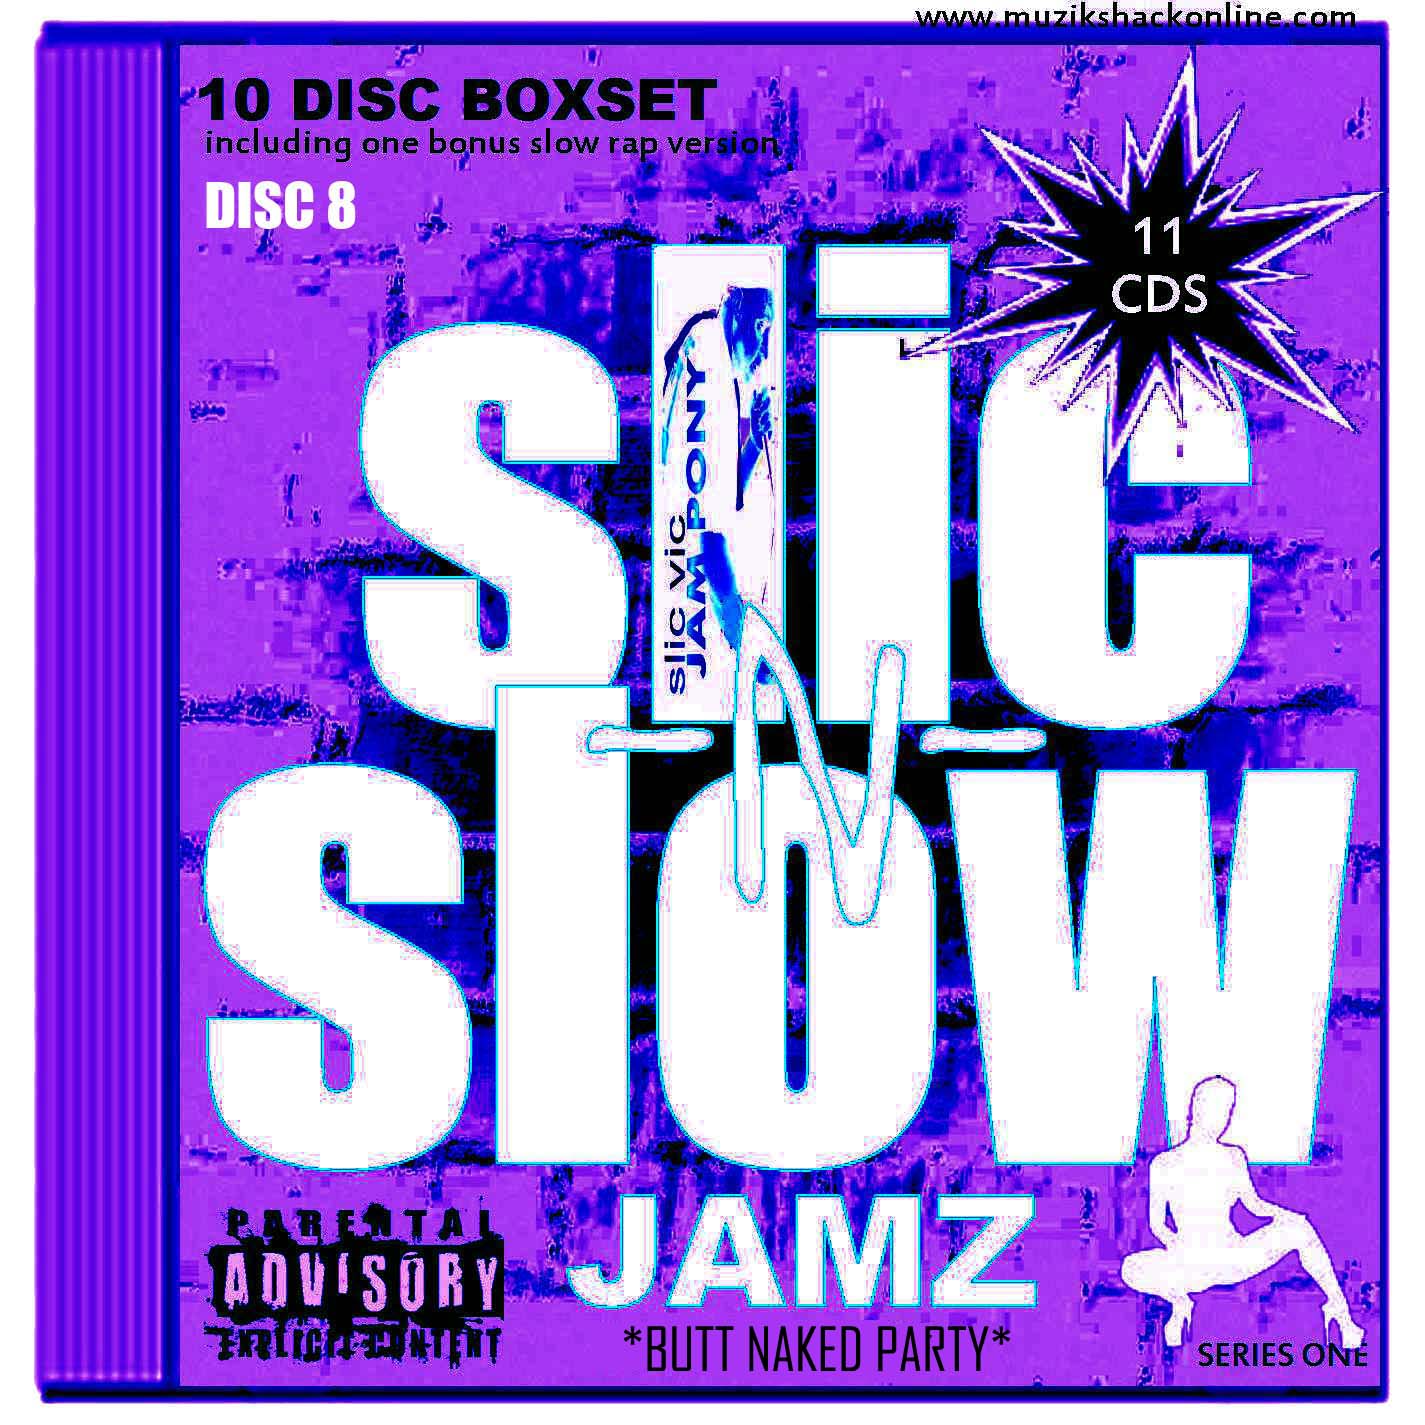 SLIC N SLOW - BUTT NAKED PARTY (RARE COPY) c2005